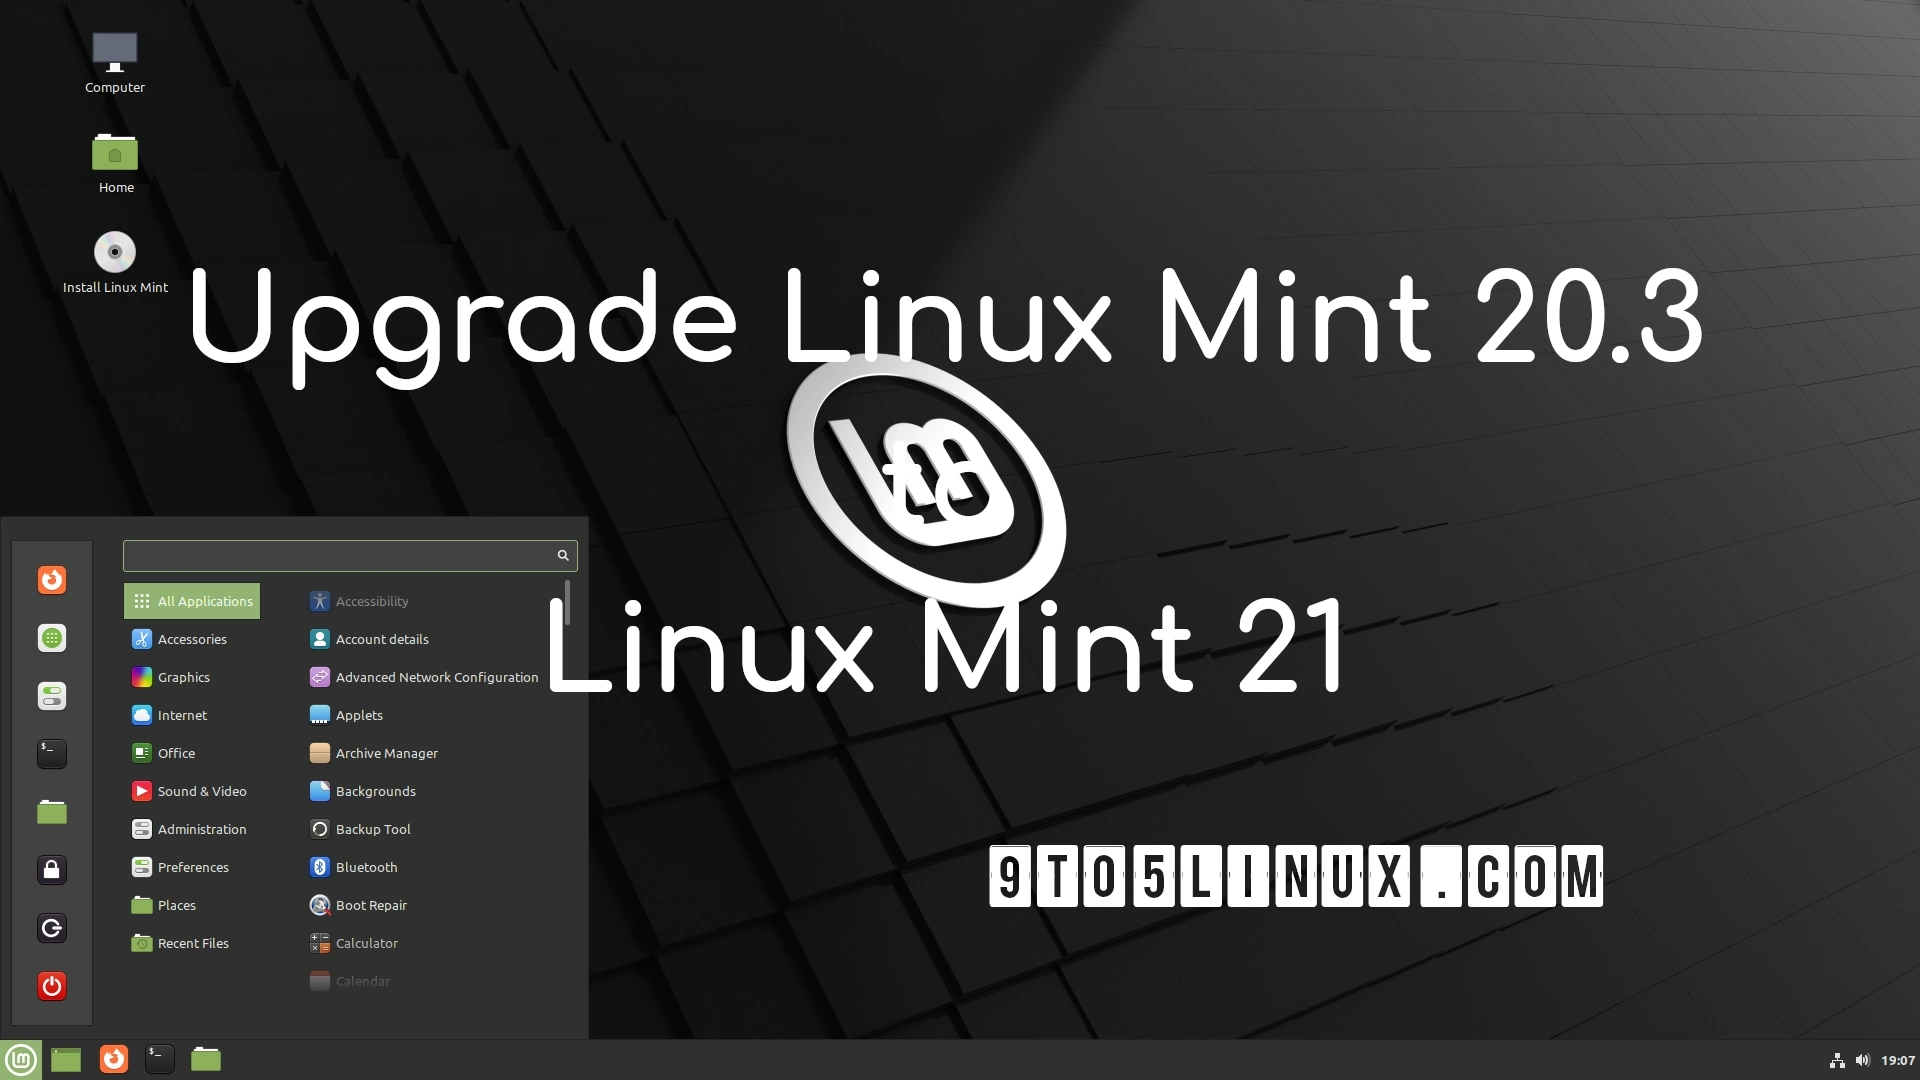 Linux Mint 20.3 Users Can Now Upgrade to Linux Mint 21, Here’s How - 9to5Linux